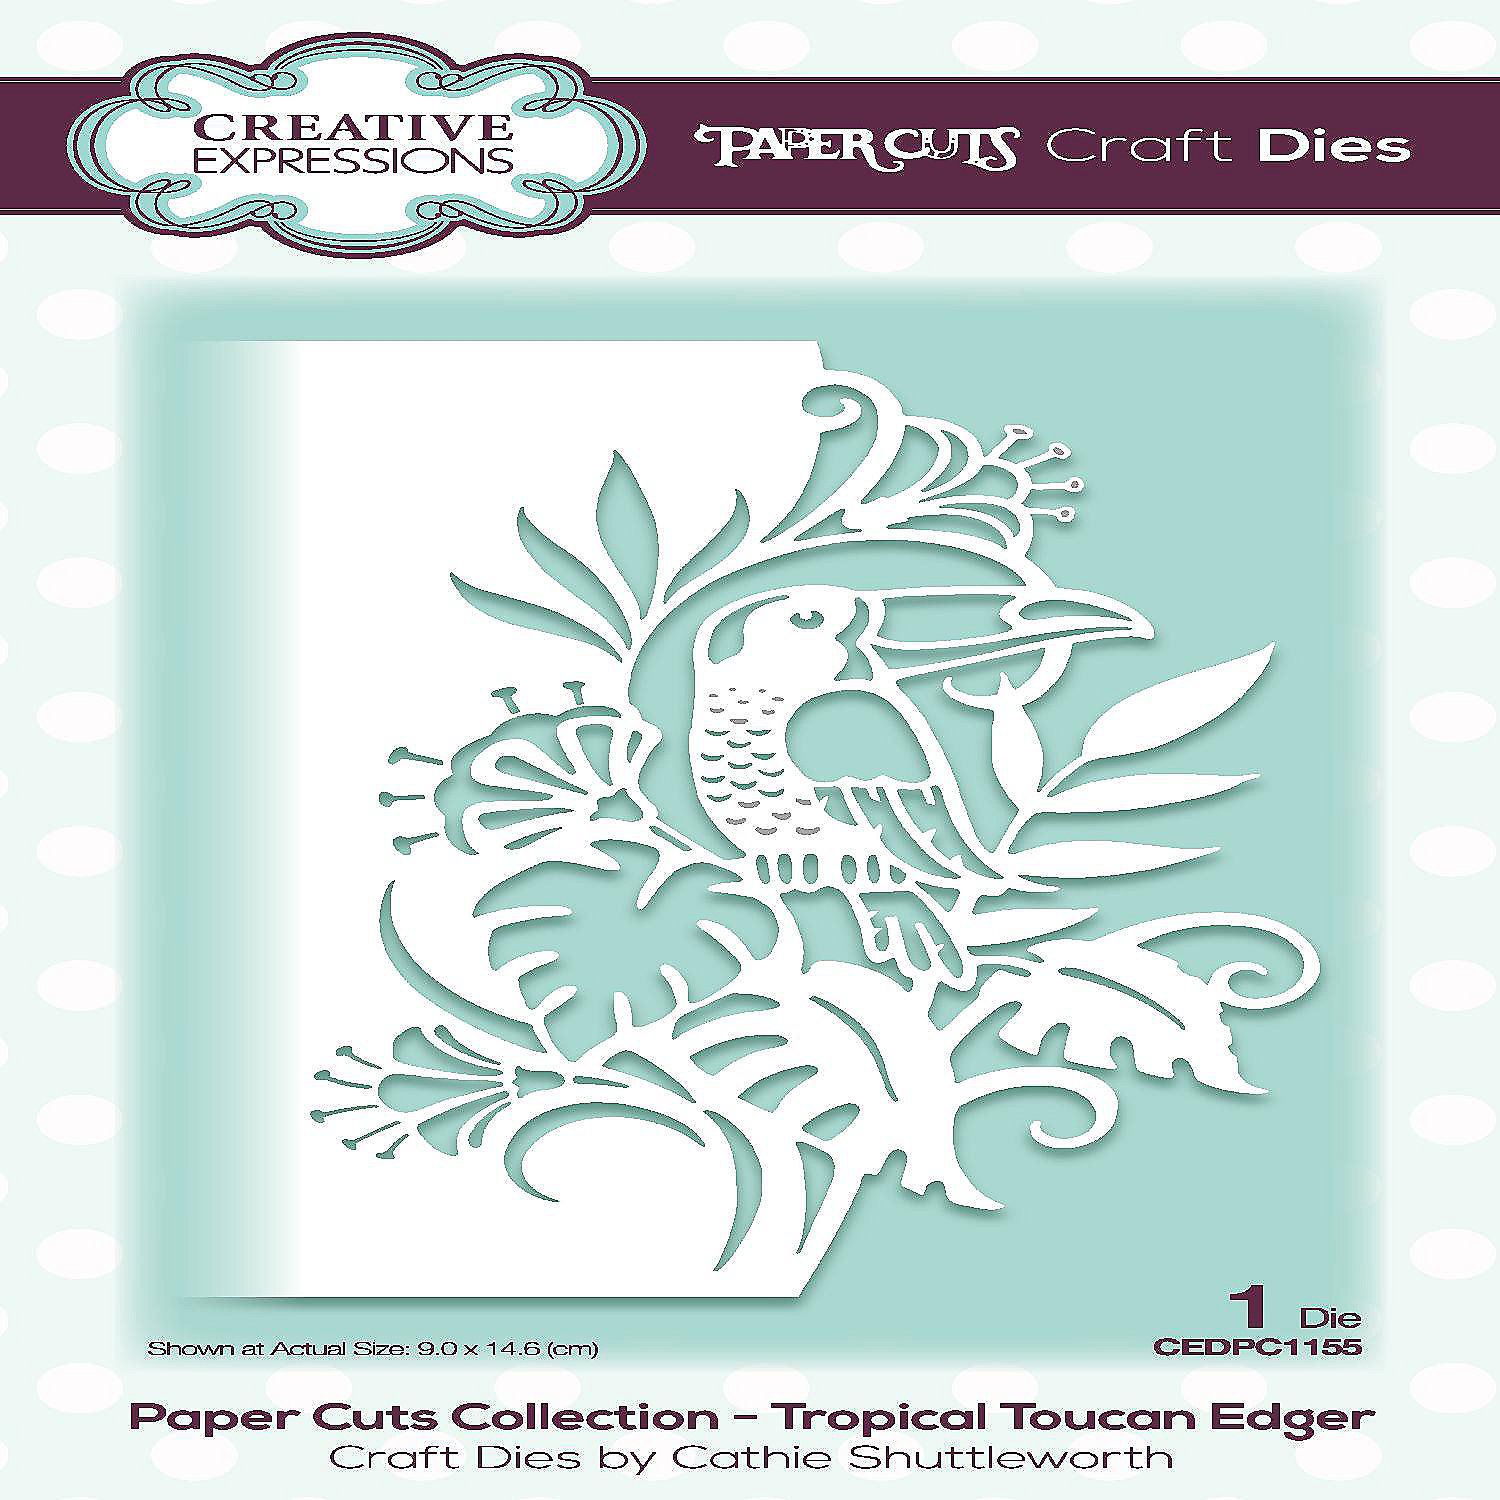 Creative Expressions Paper Cuts Edger Craft Dies-Tropical Toucan 